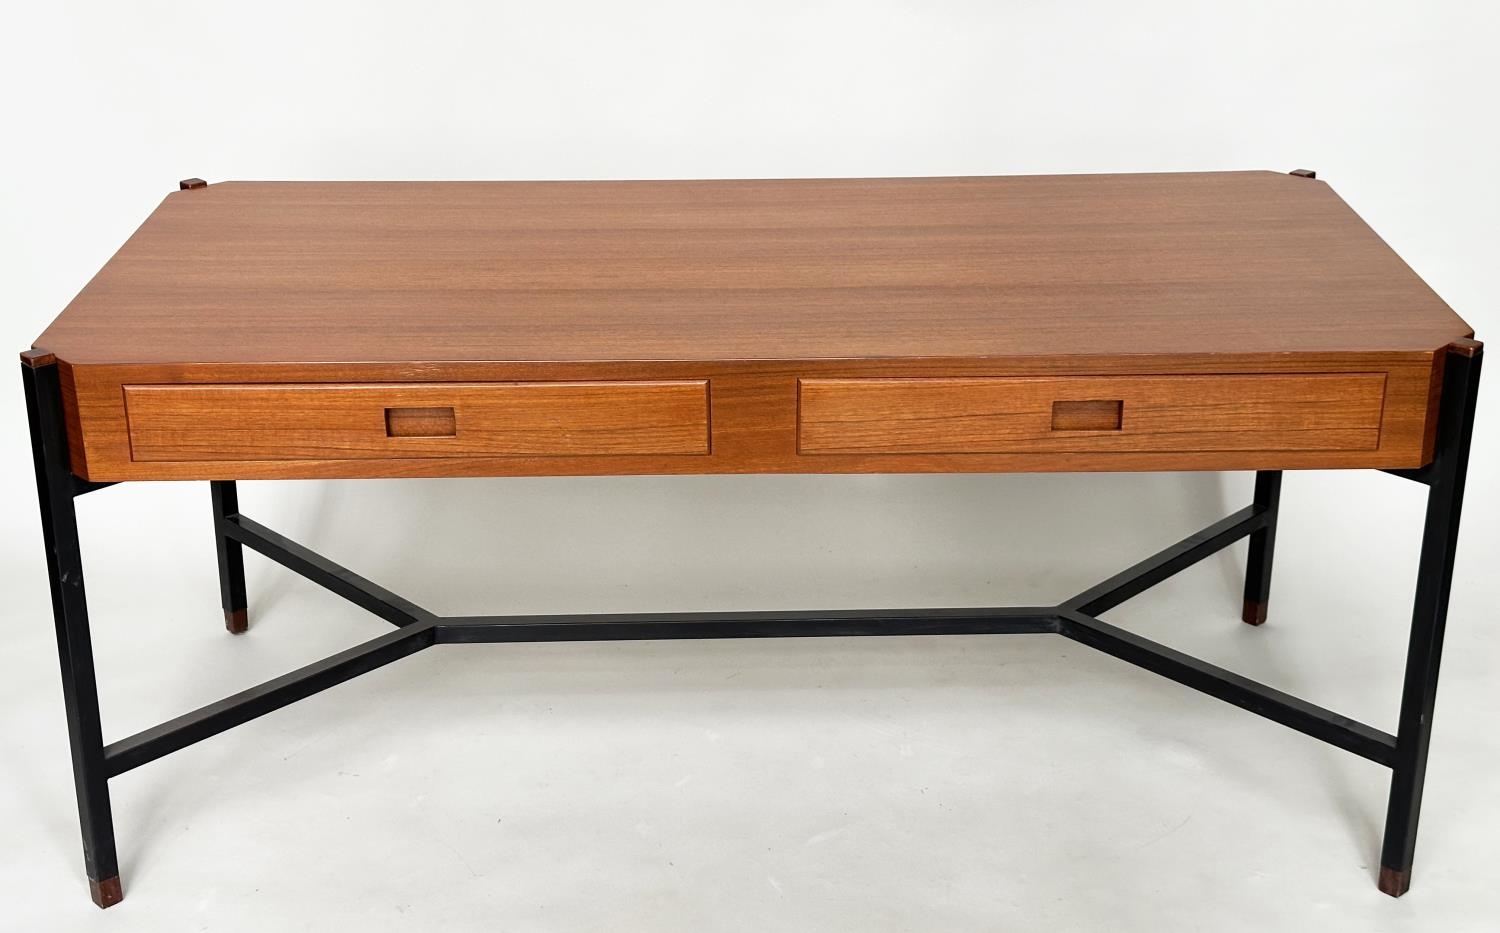 DESK, teak, in the manner of Ico Parisi, with two drawers and stretchered lacquered metal